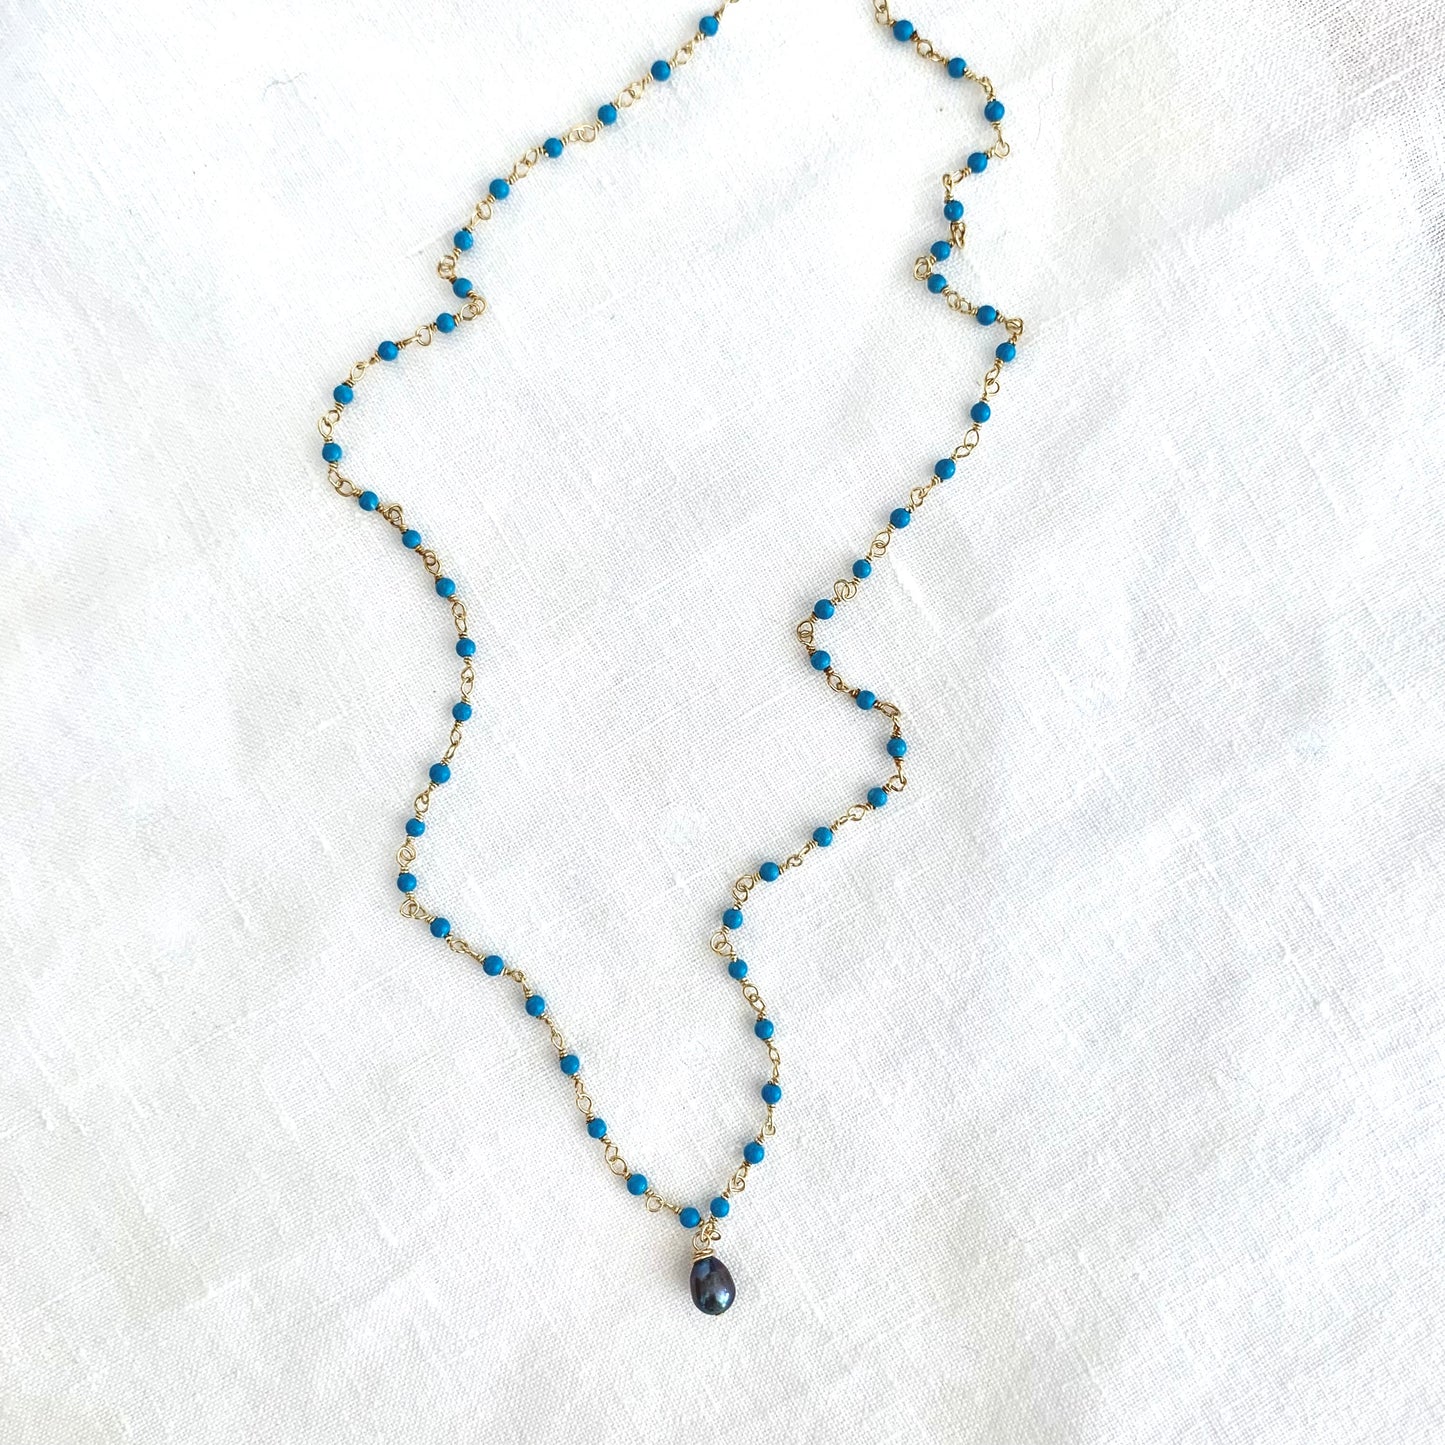 Brooke turquoise & peacock pearl necklace